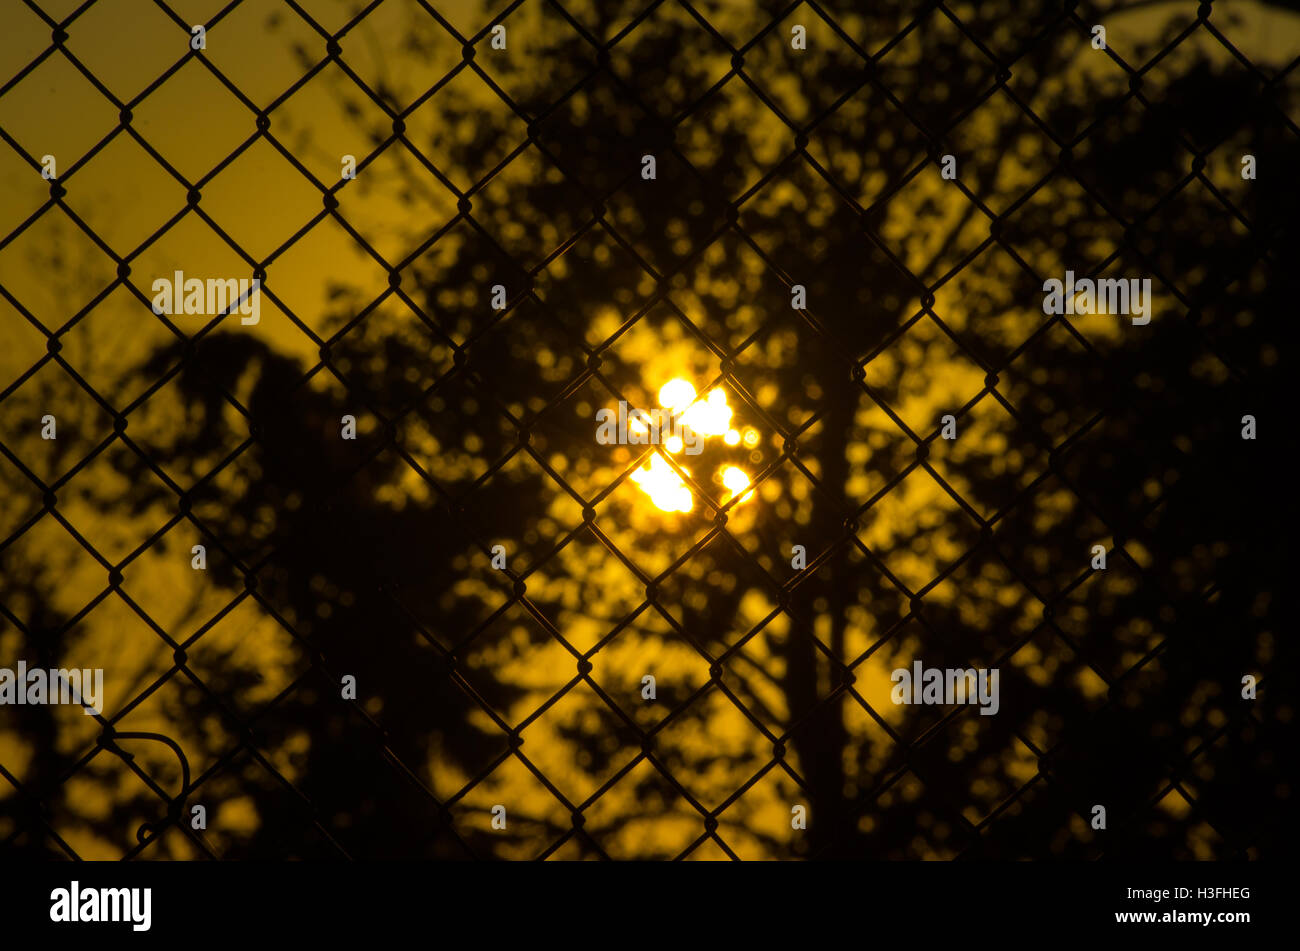 Dark silhouette of fence with setting sun behind Stock Photo